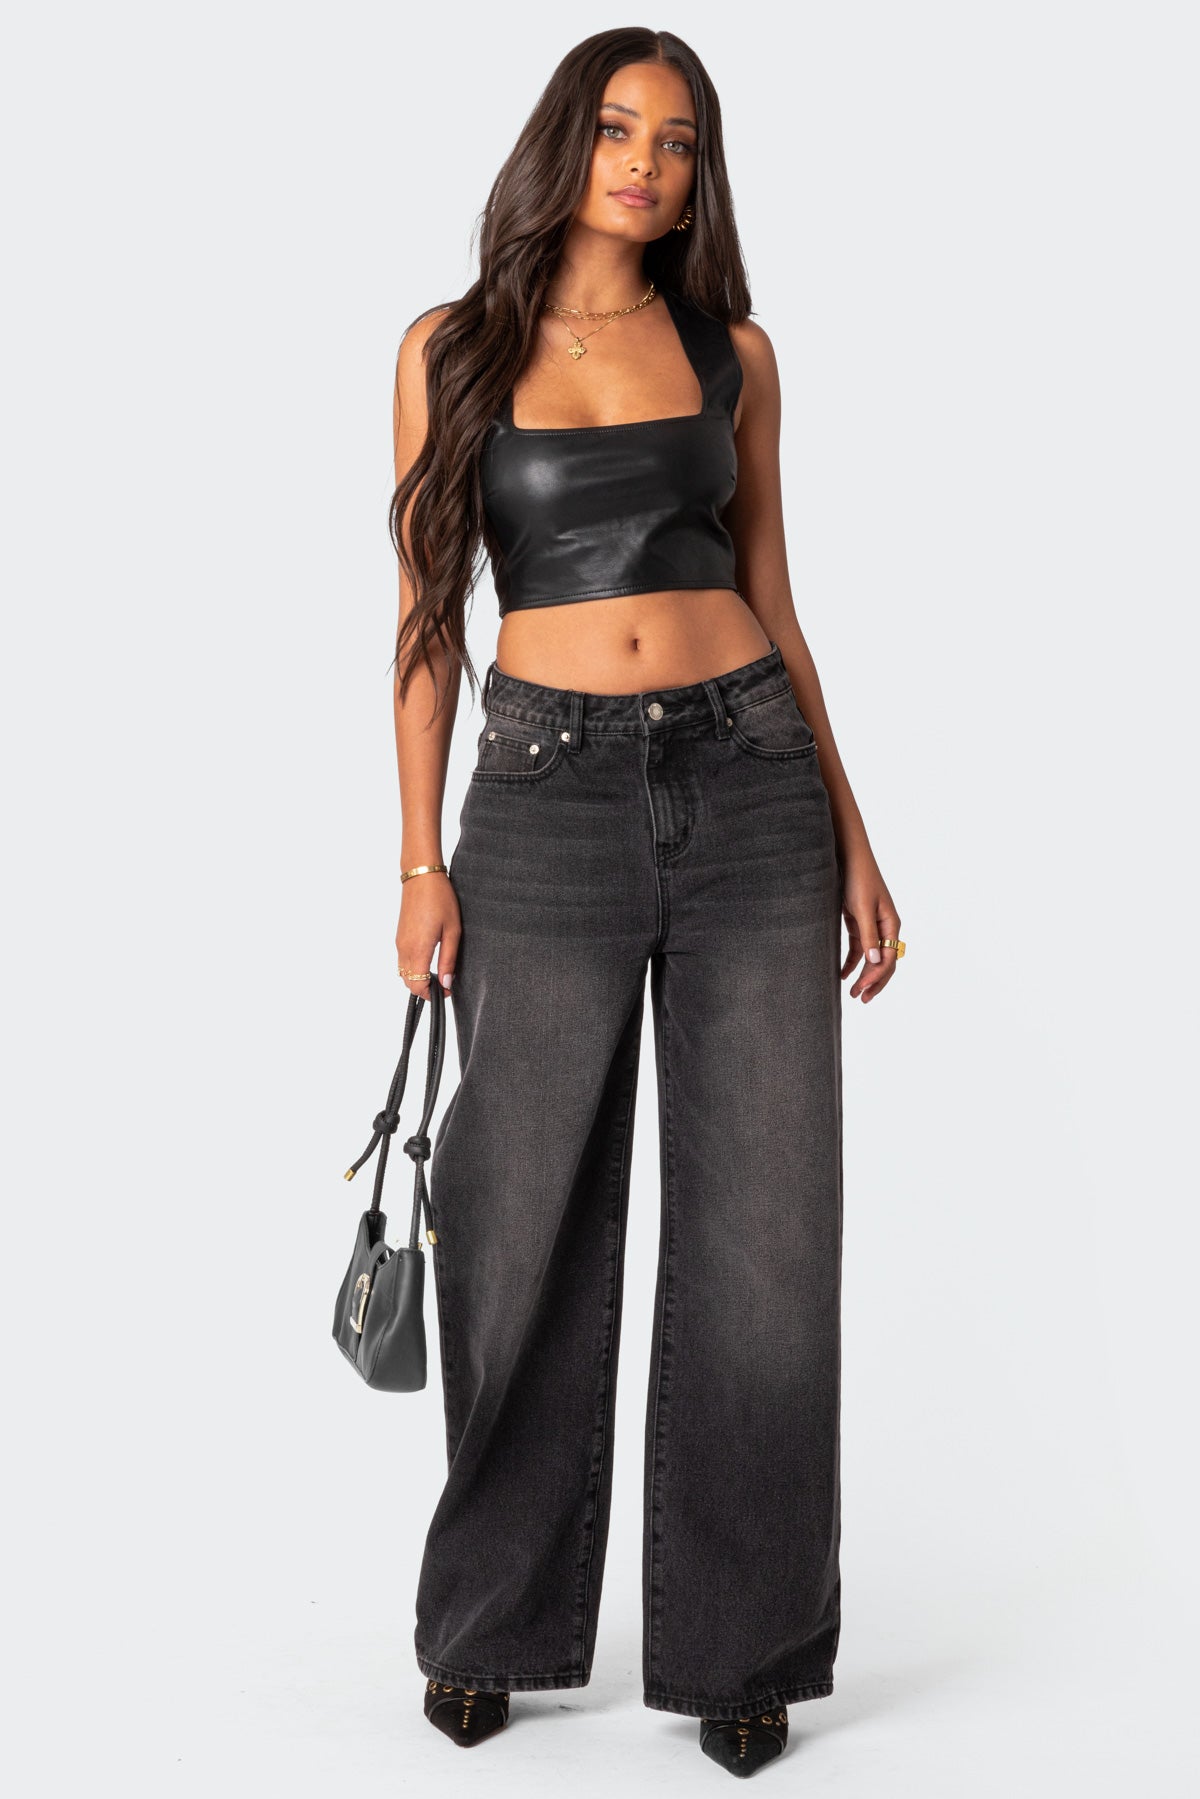 Crescent Faux Leather Crop Top